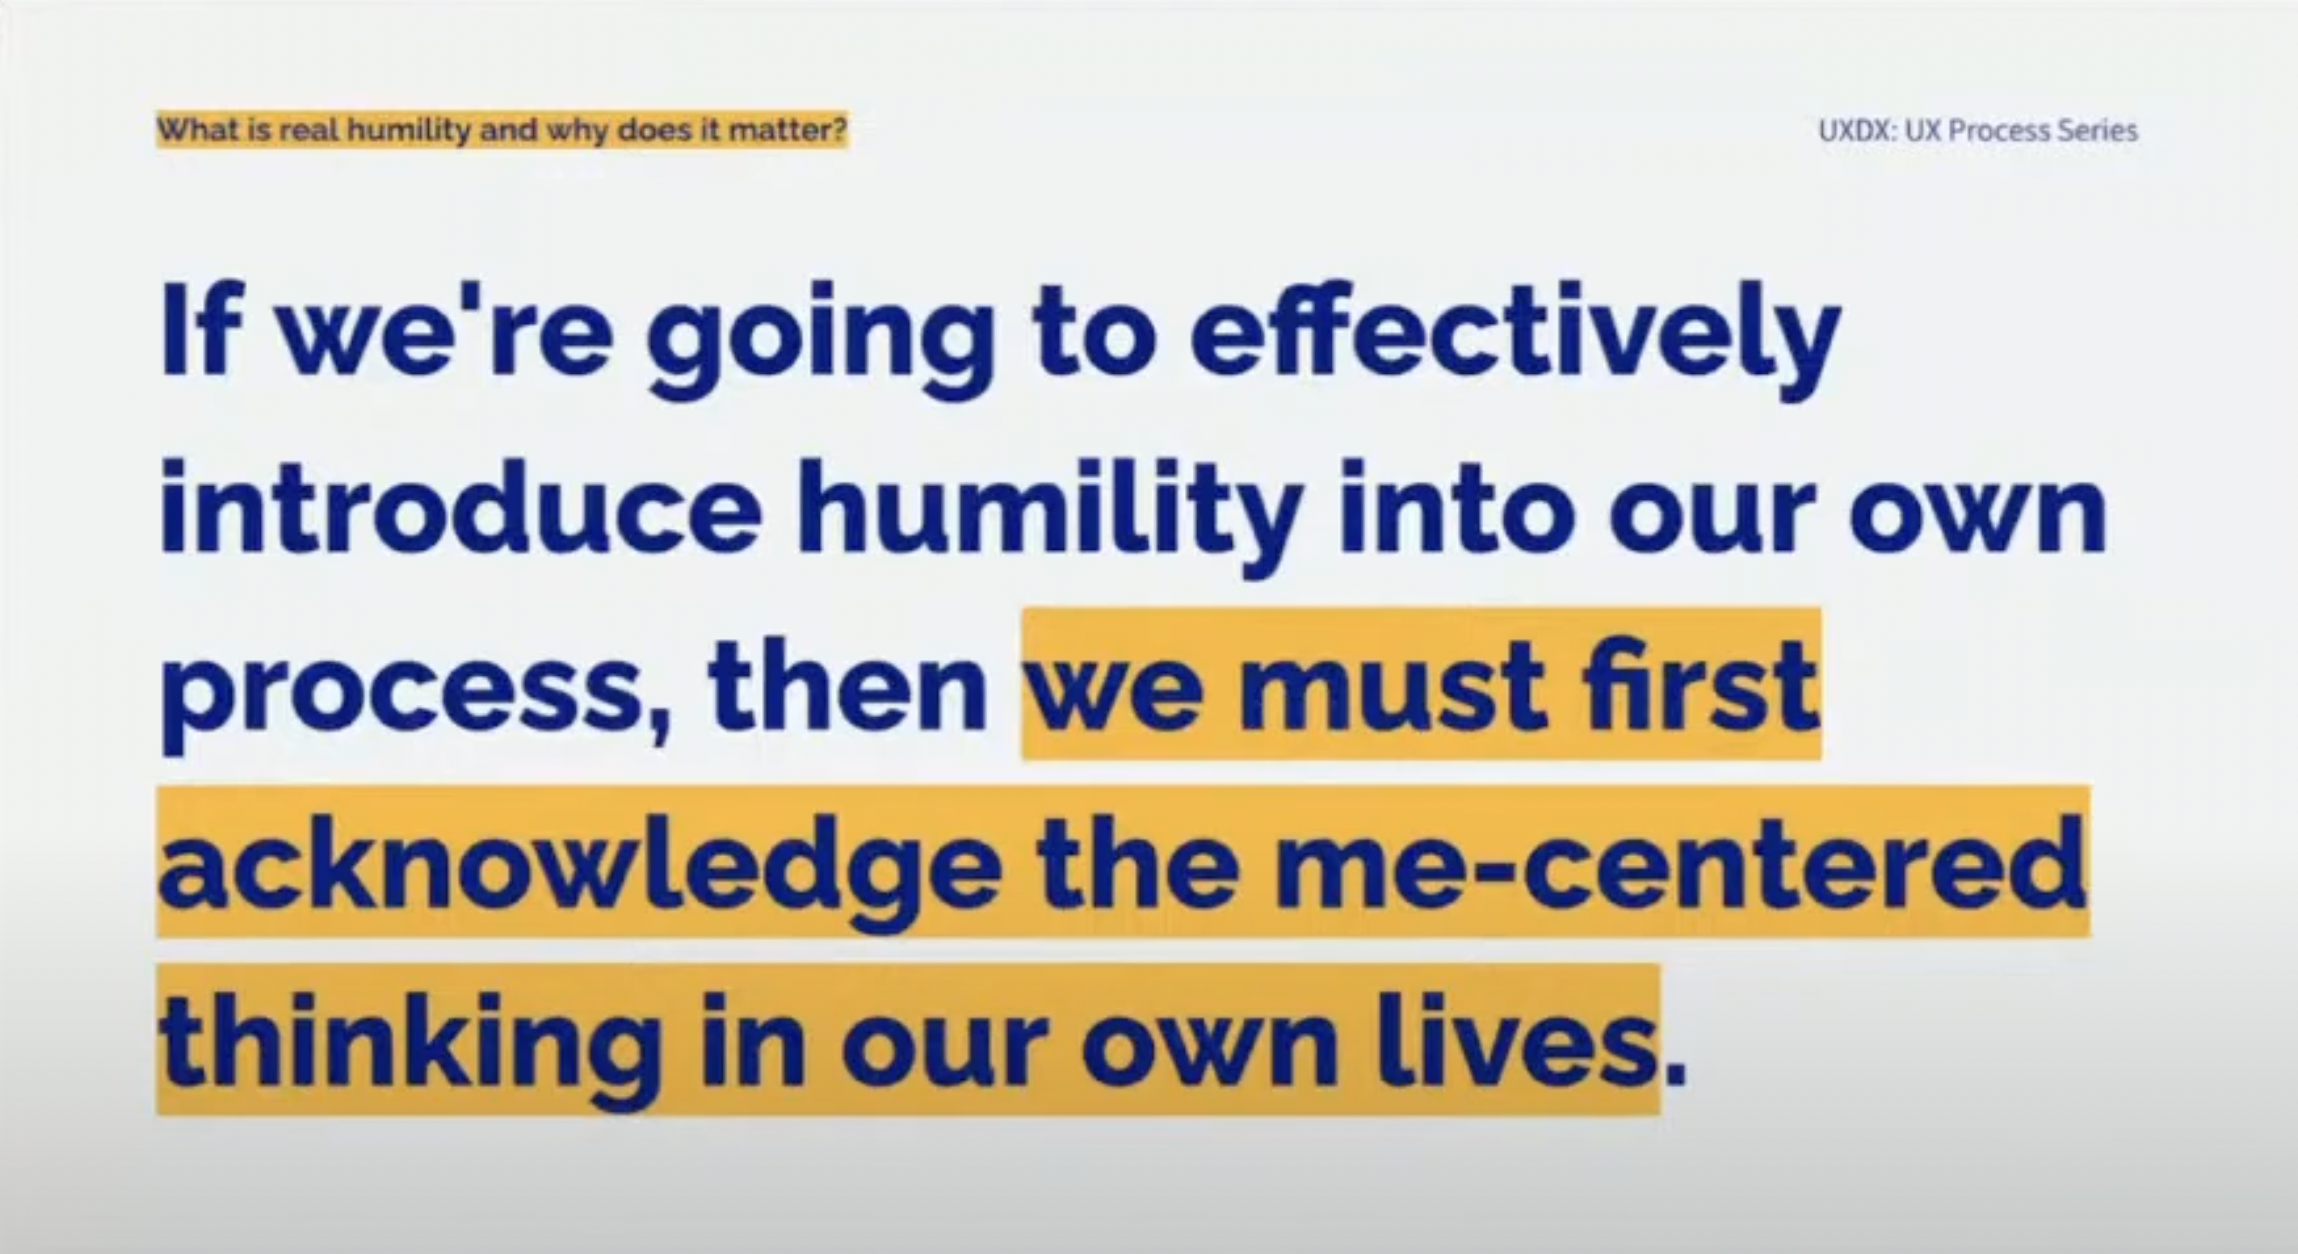 If we're going to effectively introduce humility into our own process, then we must first acknowledge the me-centered thinking in out own lives. 